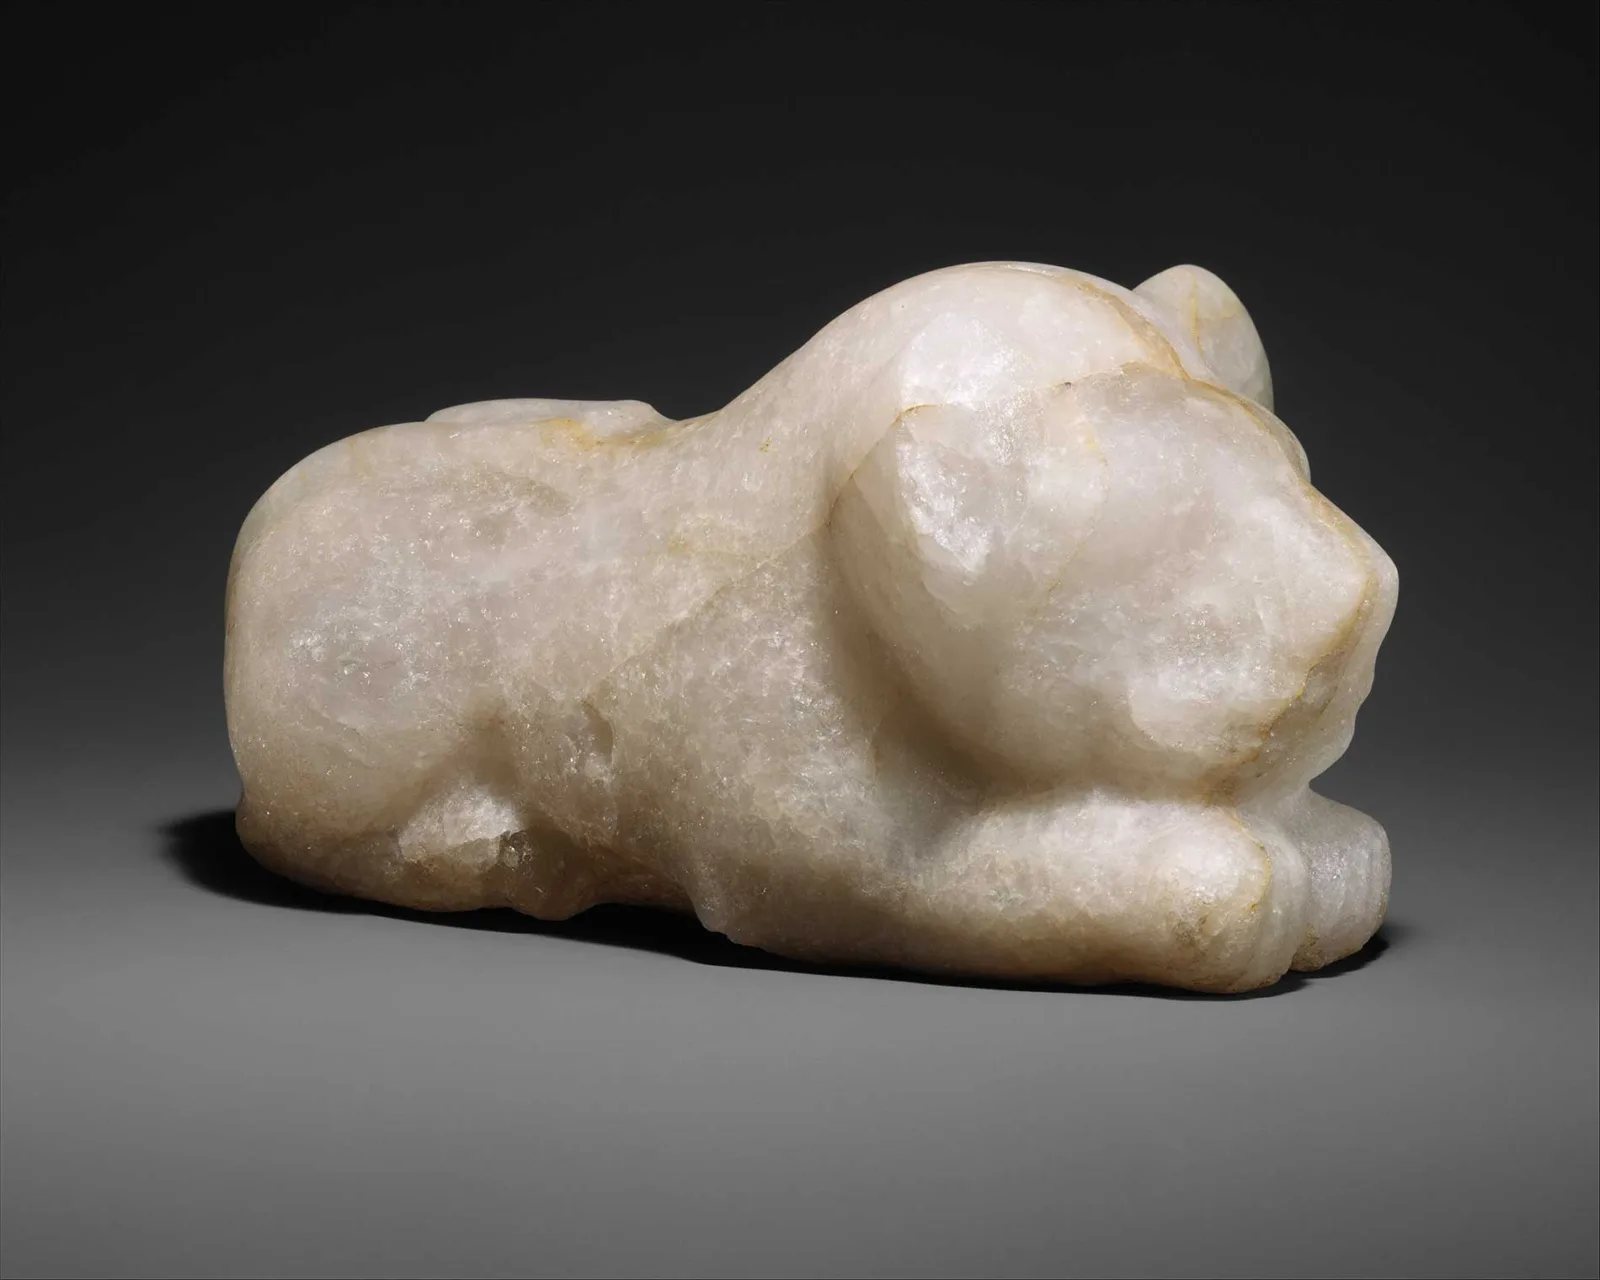 The same figure from the side. The head takes up almost half of the overall size. The boy is lying on his stomach with his head resting on his forelegs.